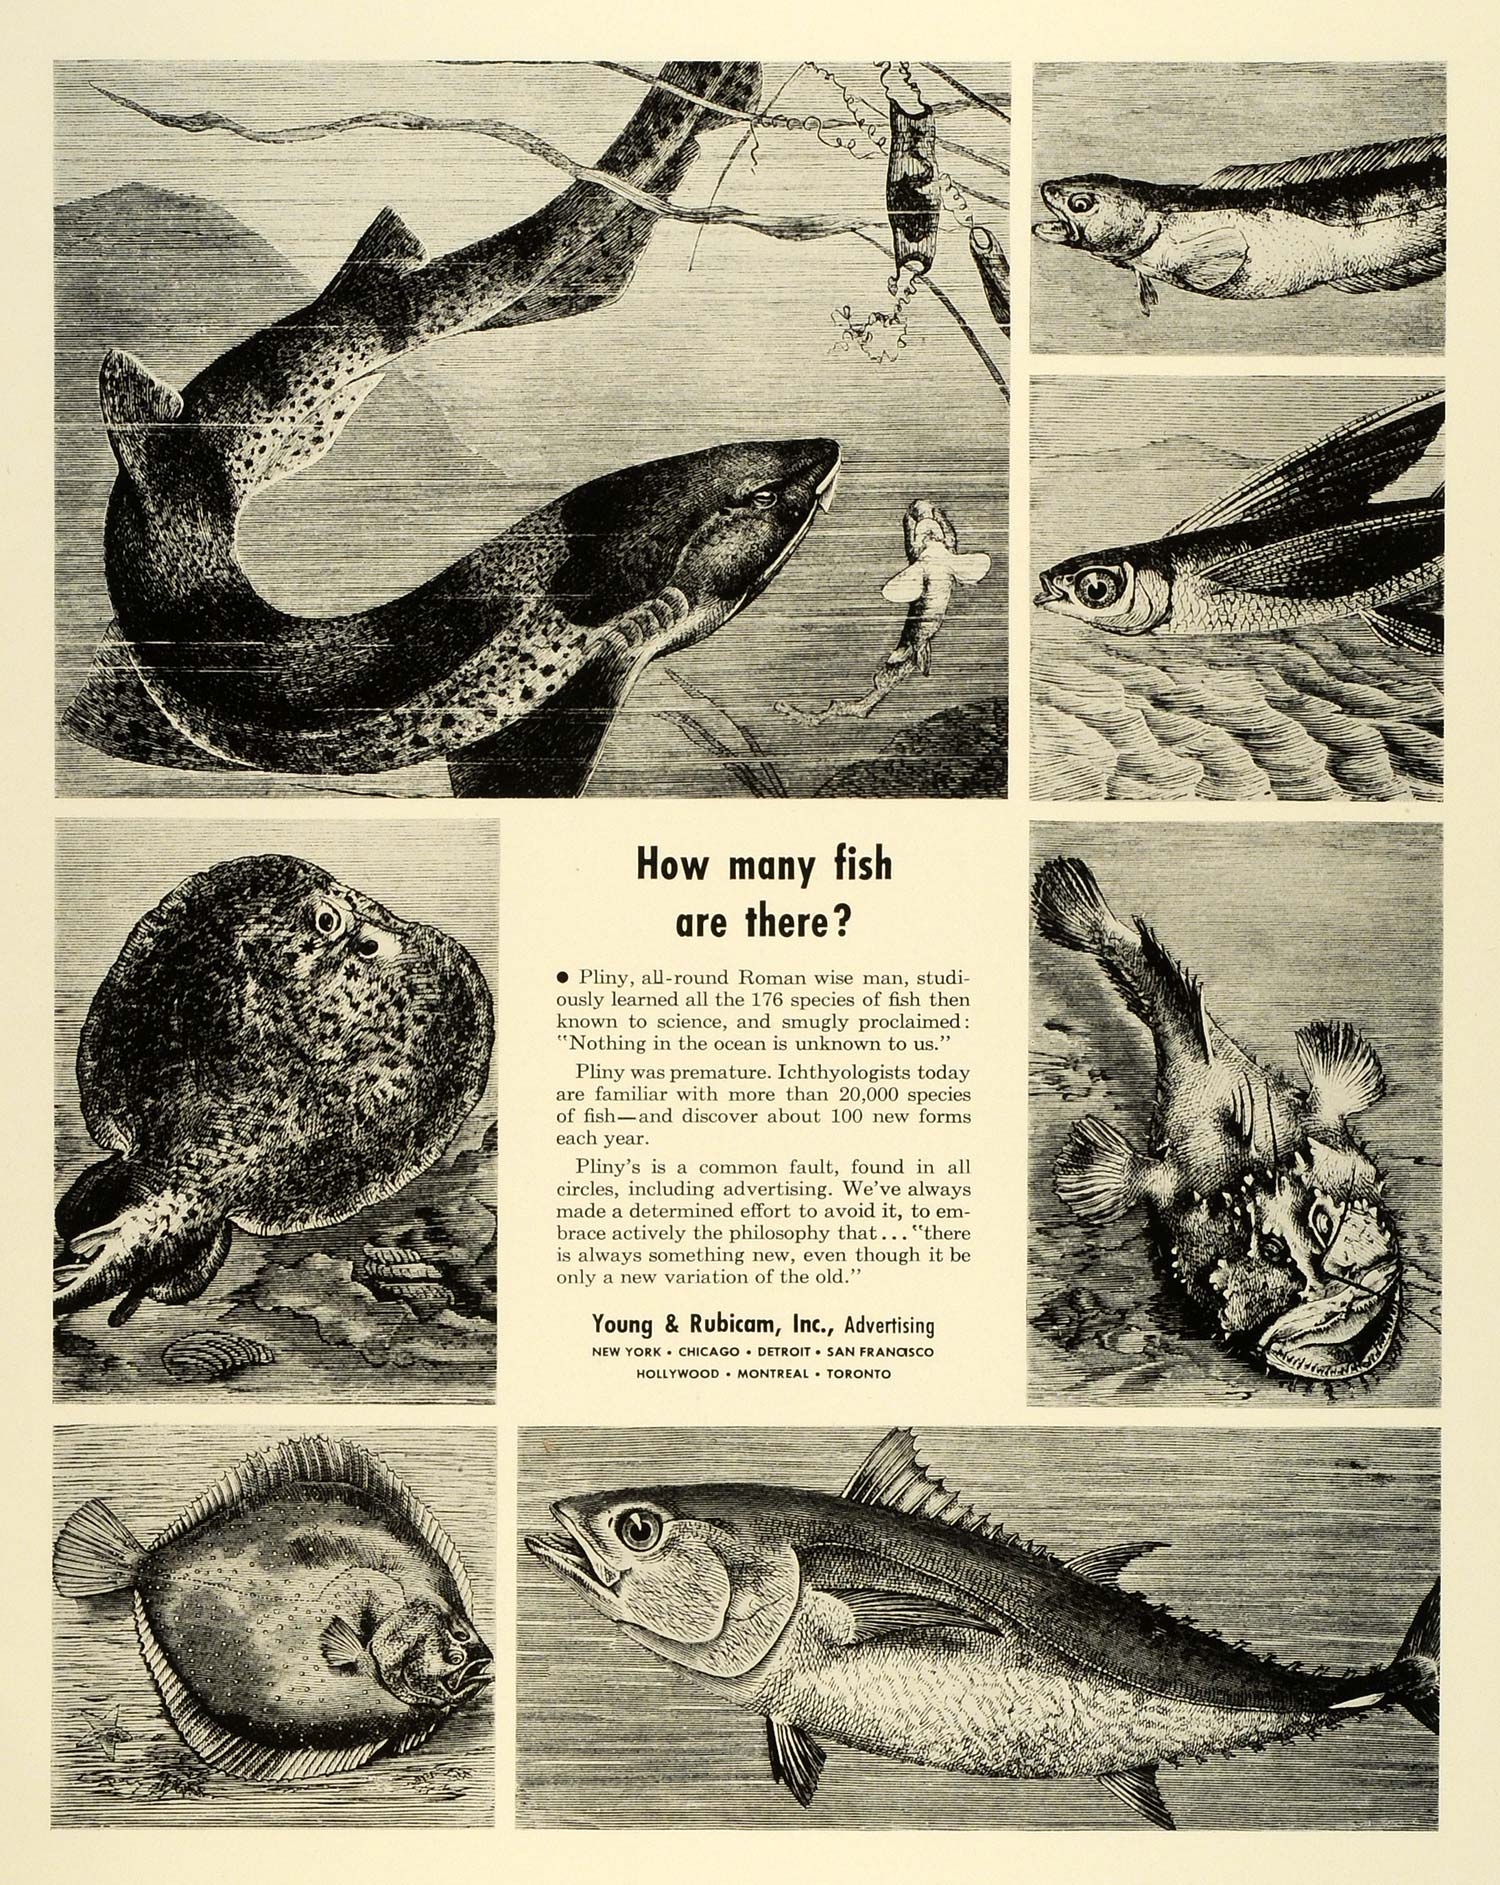 1941 Ad Young & Rubicam Inc Advertising Marketing Fishes Species Ichthyology FZ5